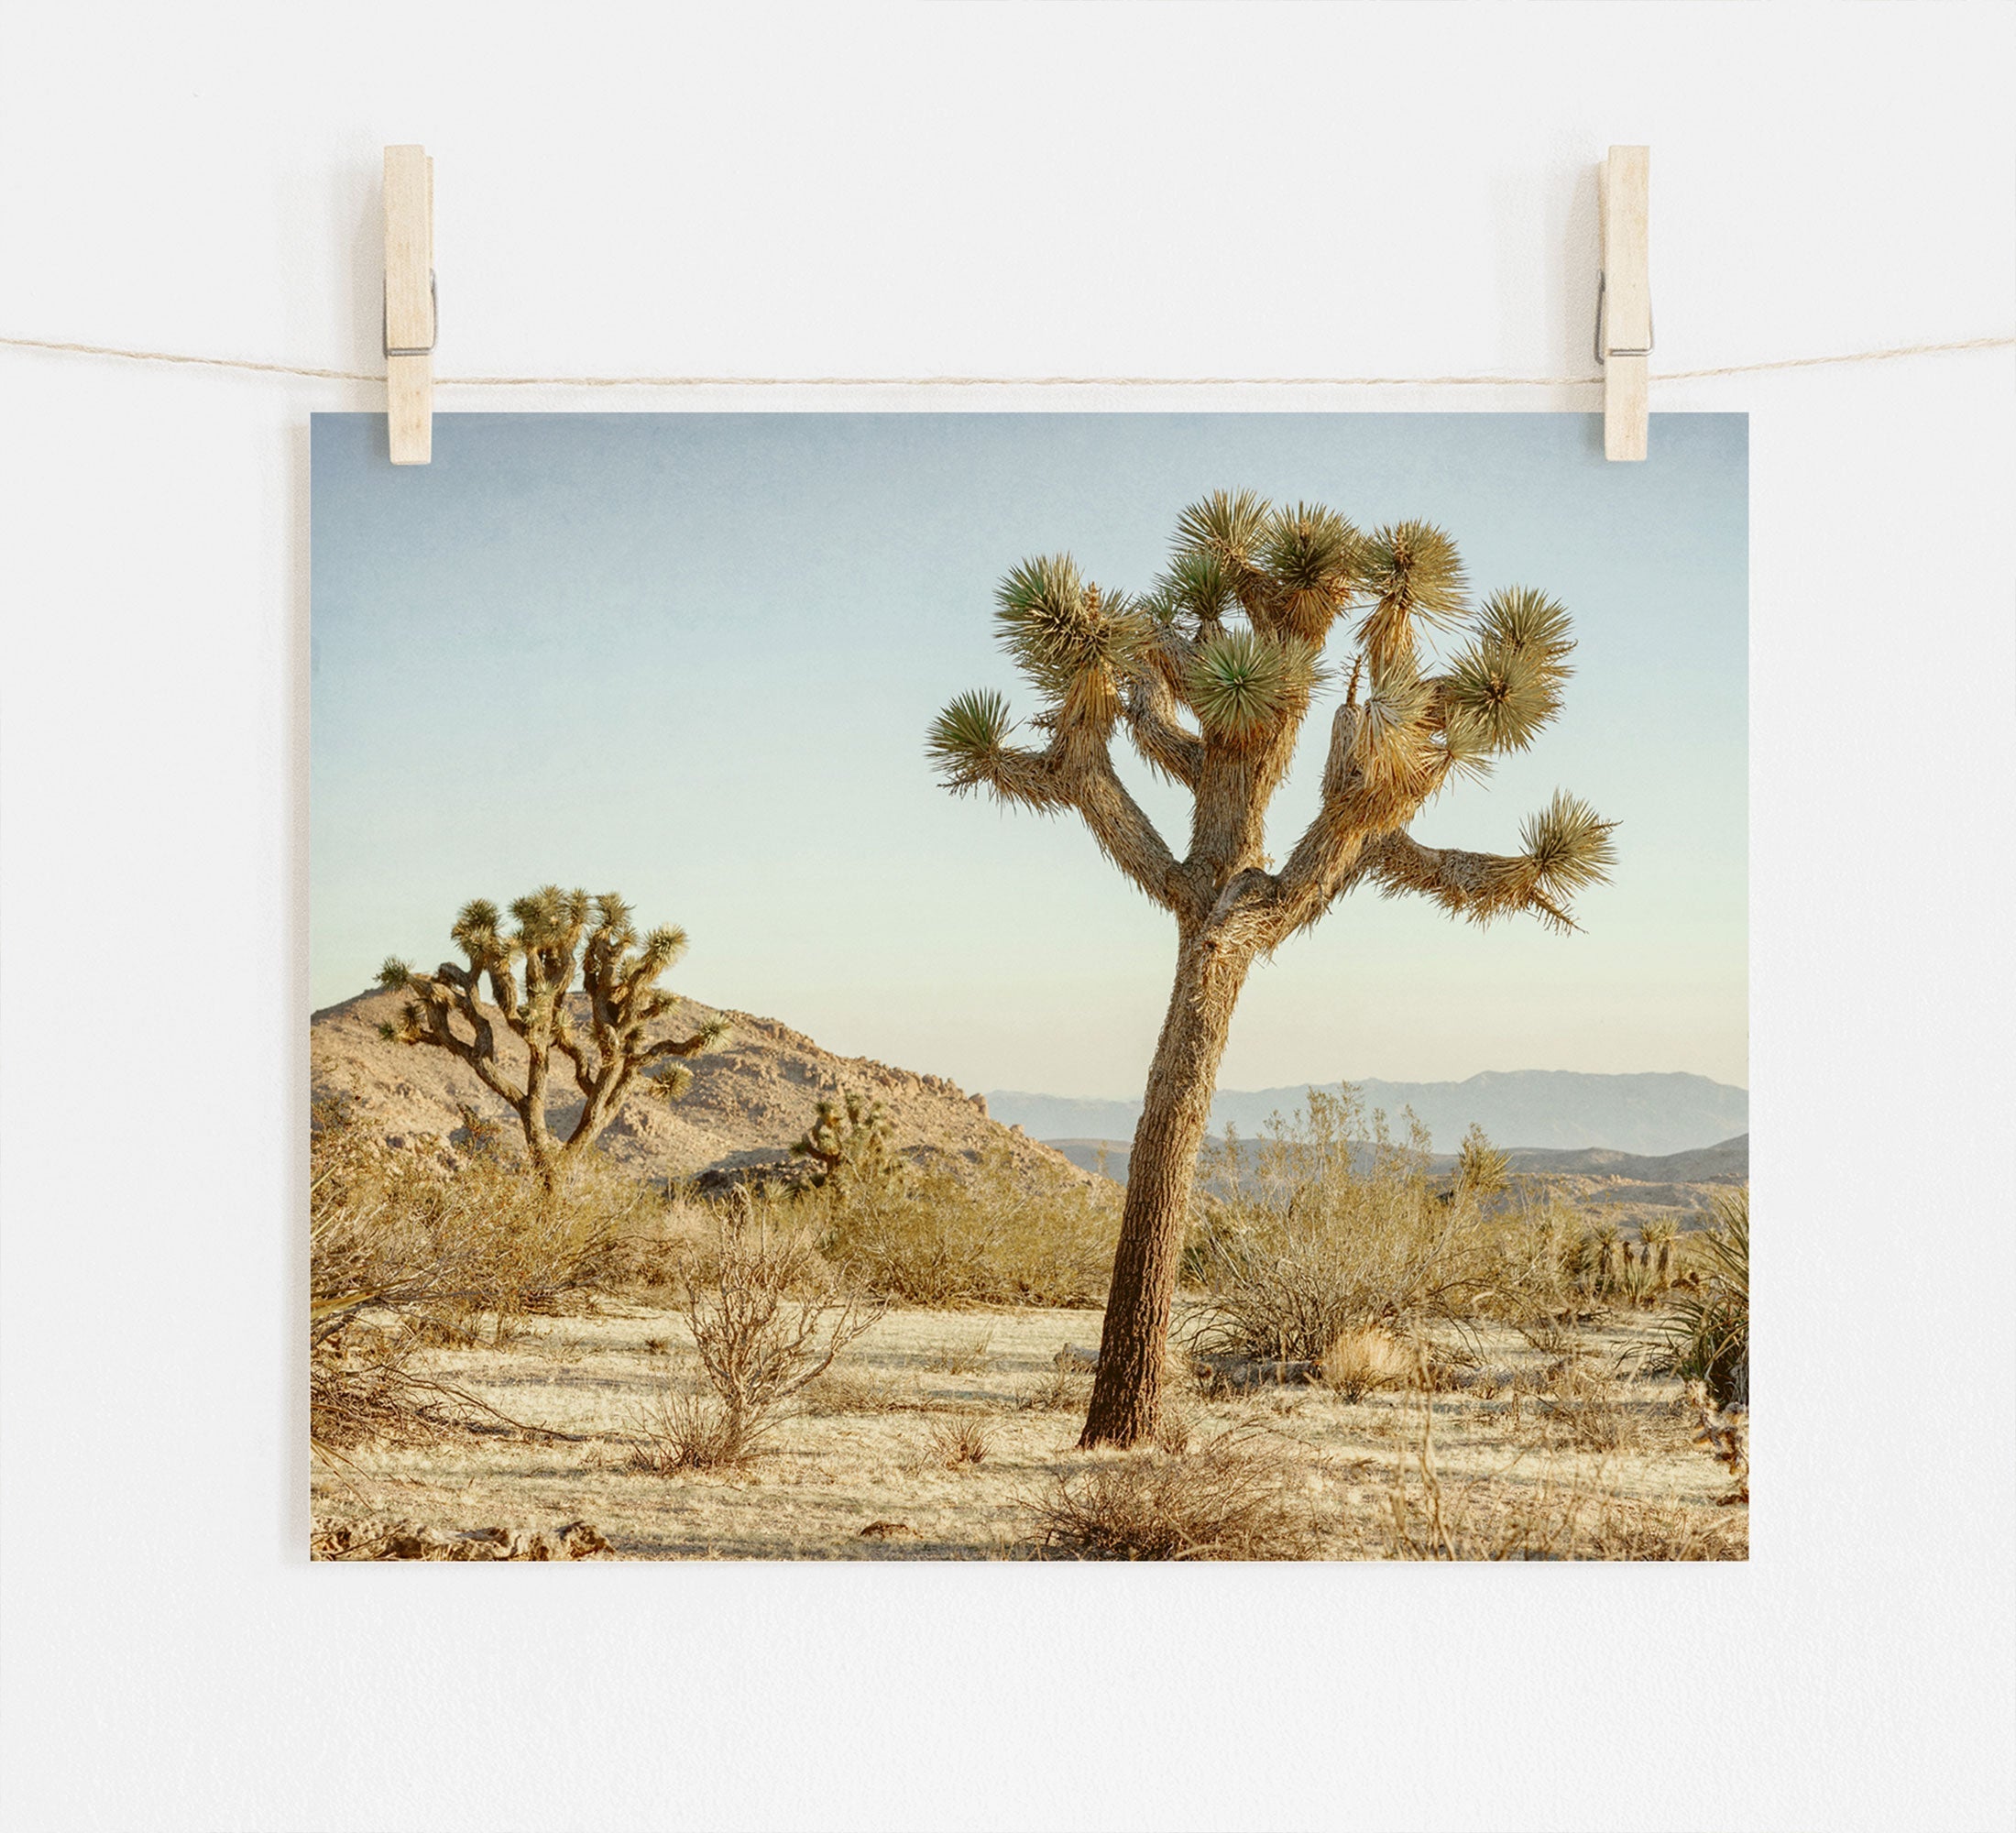 A photo of a 'Mighty Joshua' Joshua Tree Print, by Offley Green, in a desert landscape at Joshua Tree National Park, clipped onto a string with two wooden clothespins against a white background. Scenic view with blue sky and distant hills.